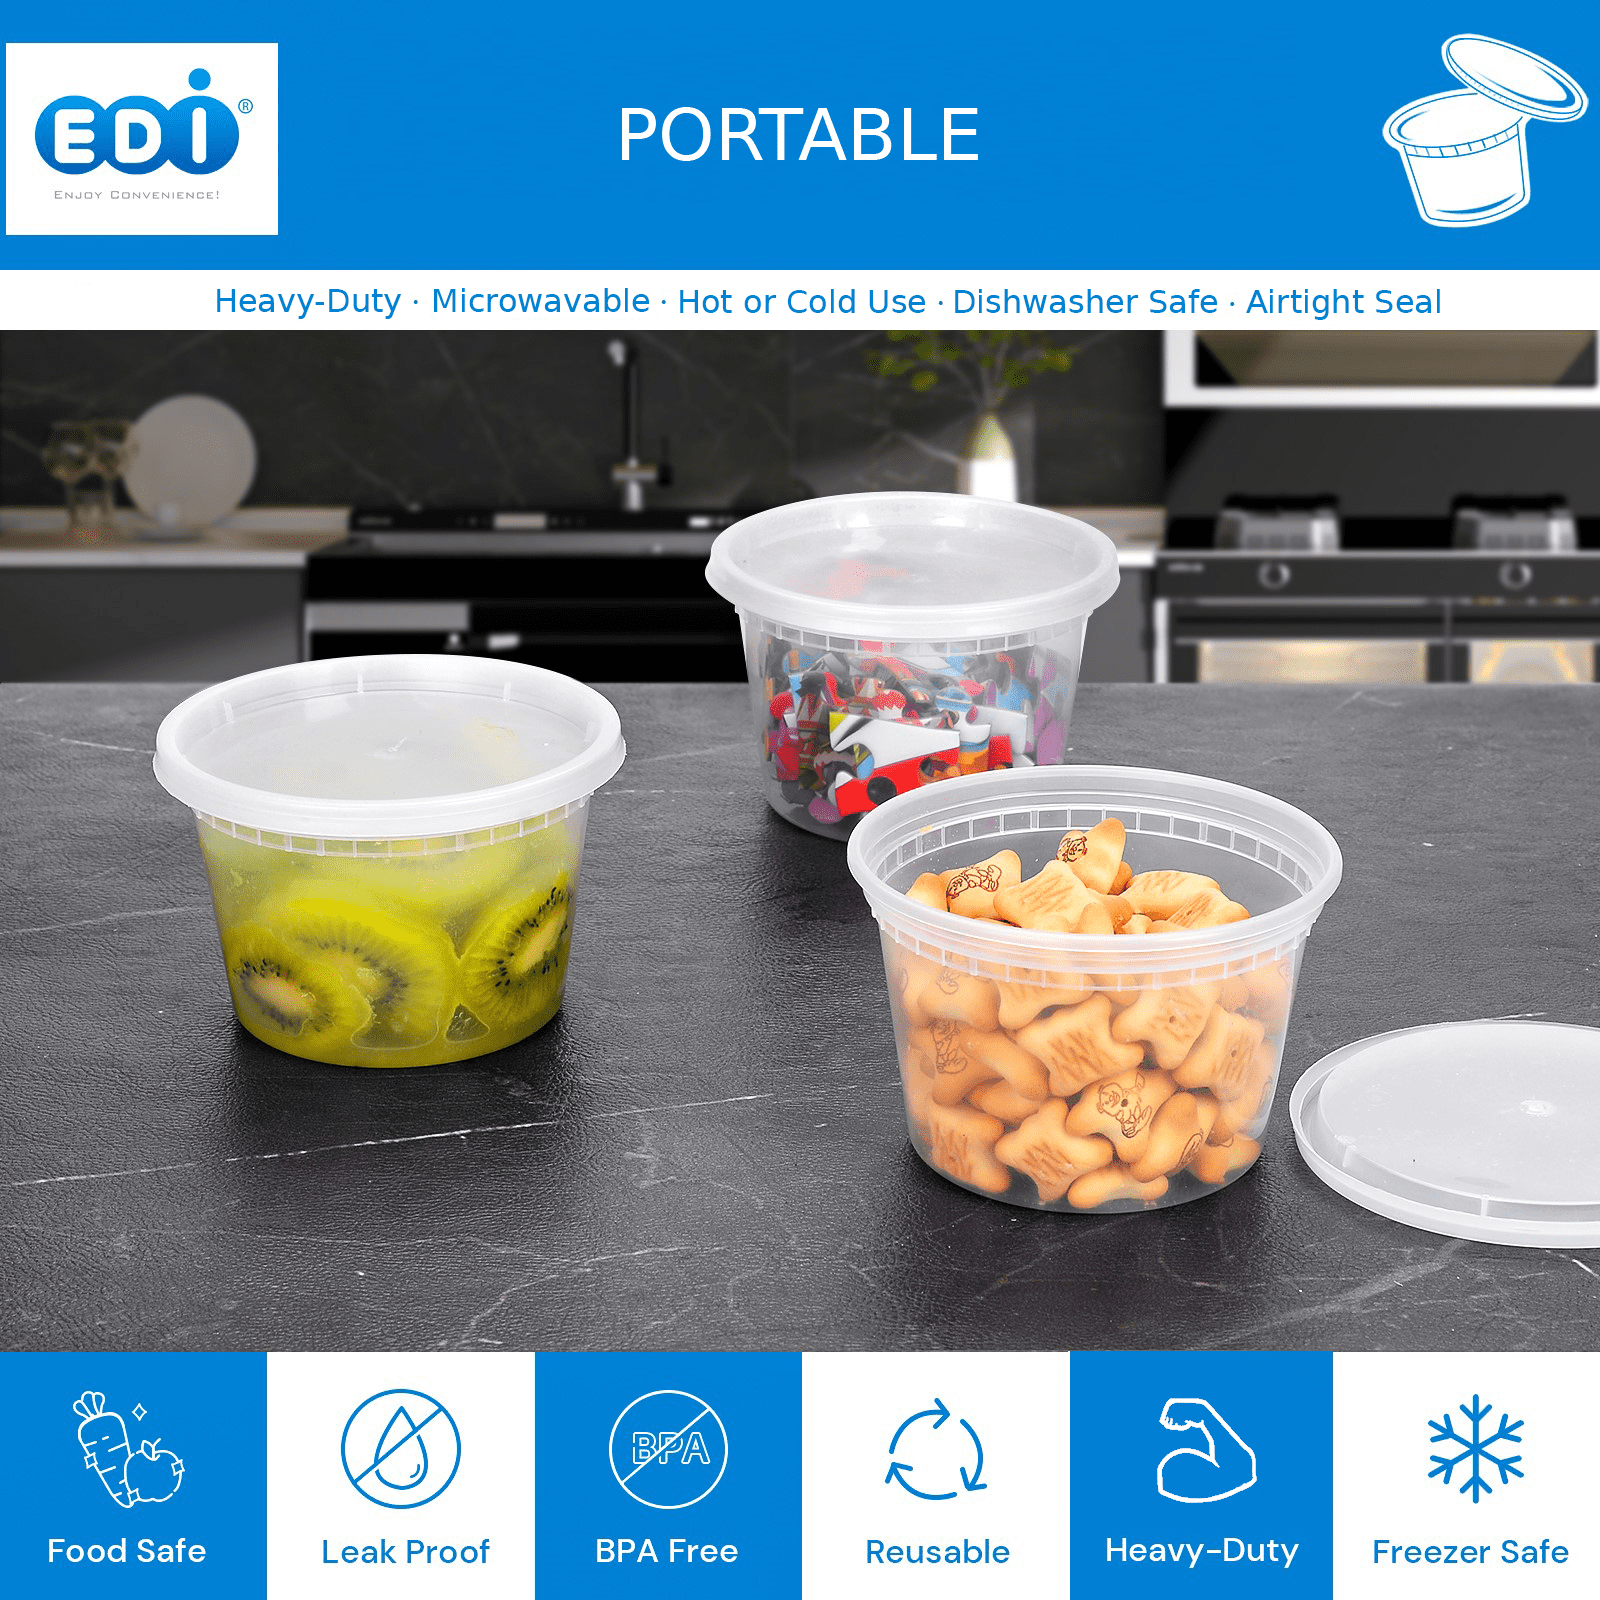 Leyso TO-JR32 32oz Round Food Container with Clear Lid - Microwave, Di